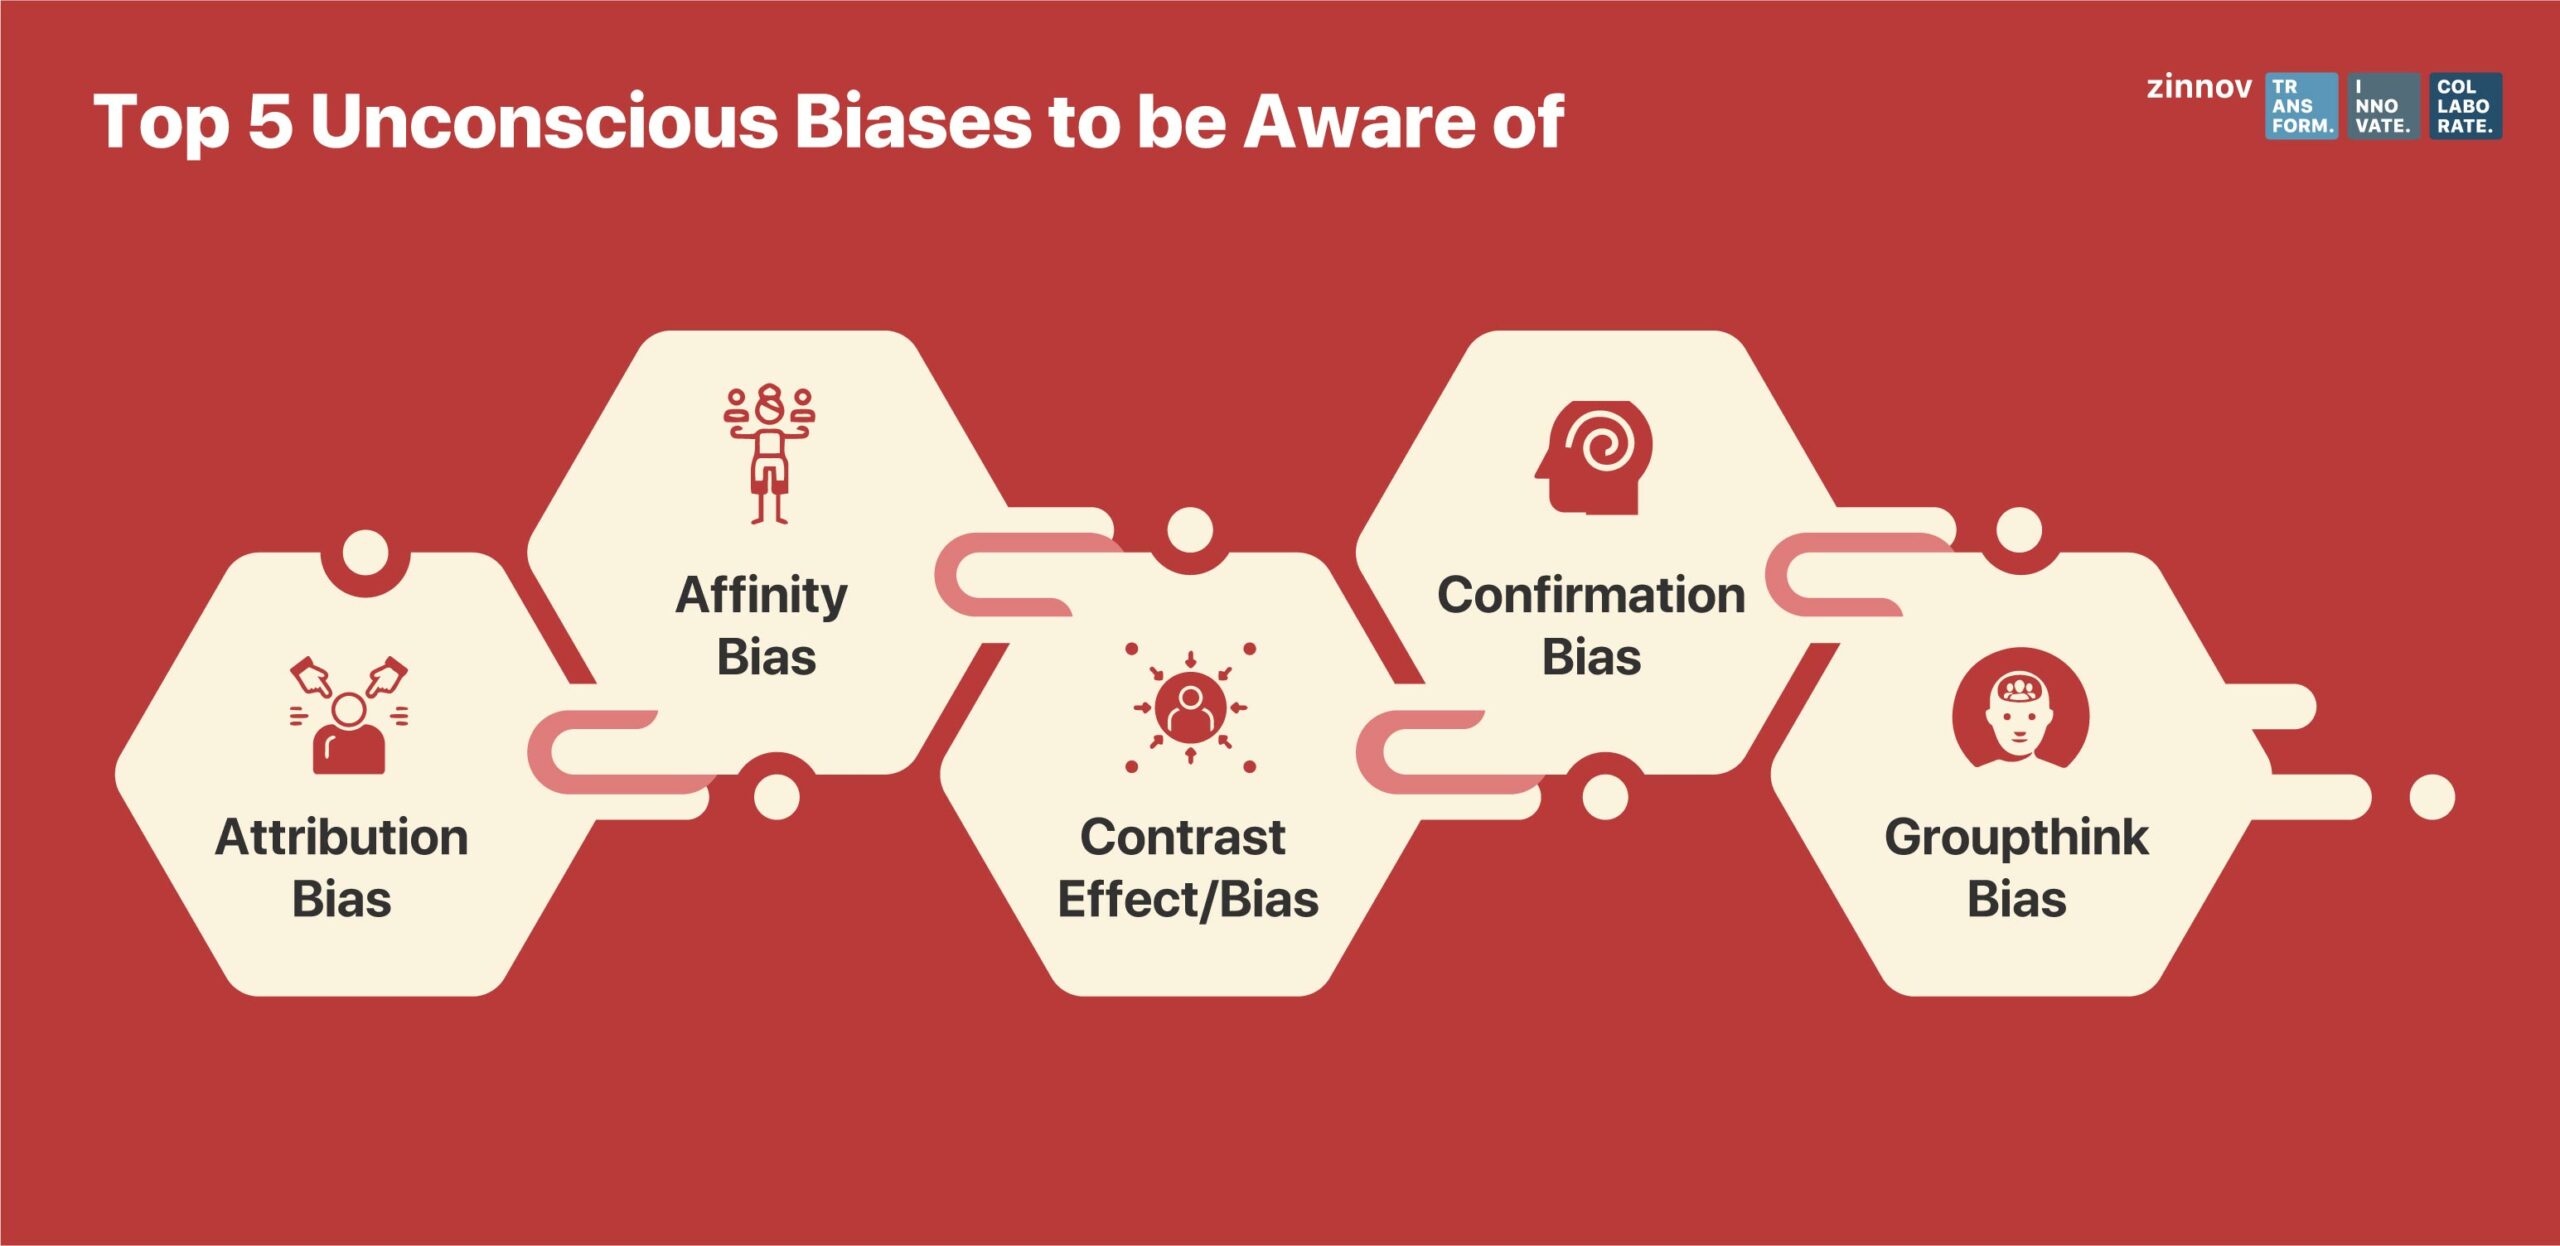 Top 5 unconscious biases to be aware of